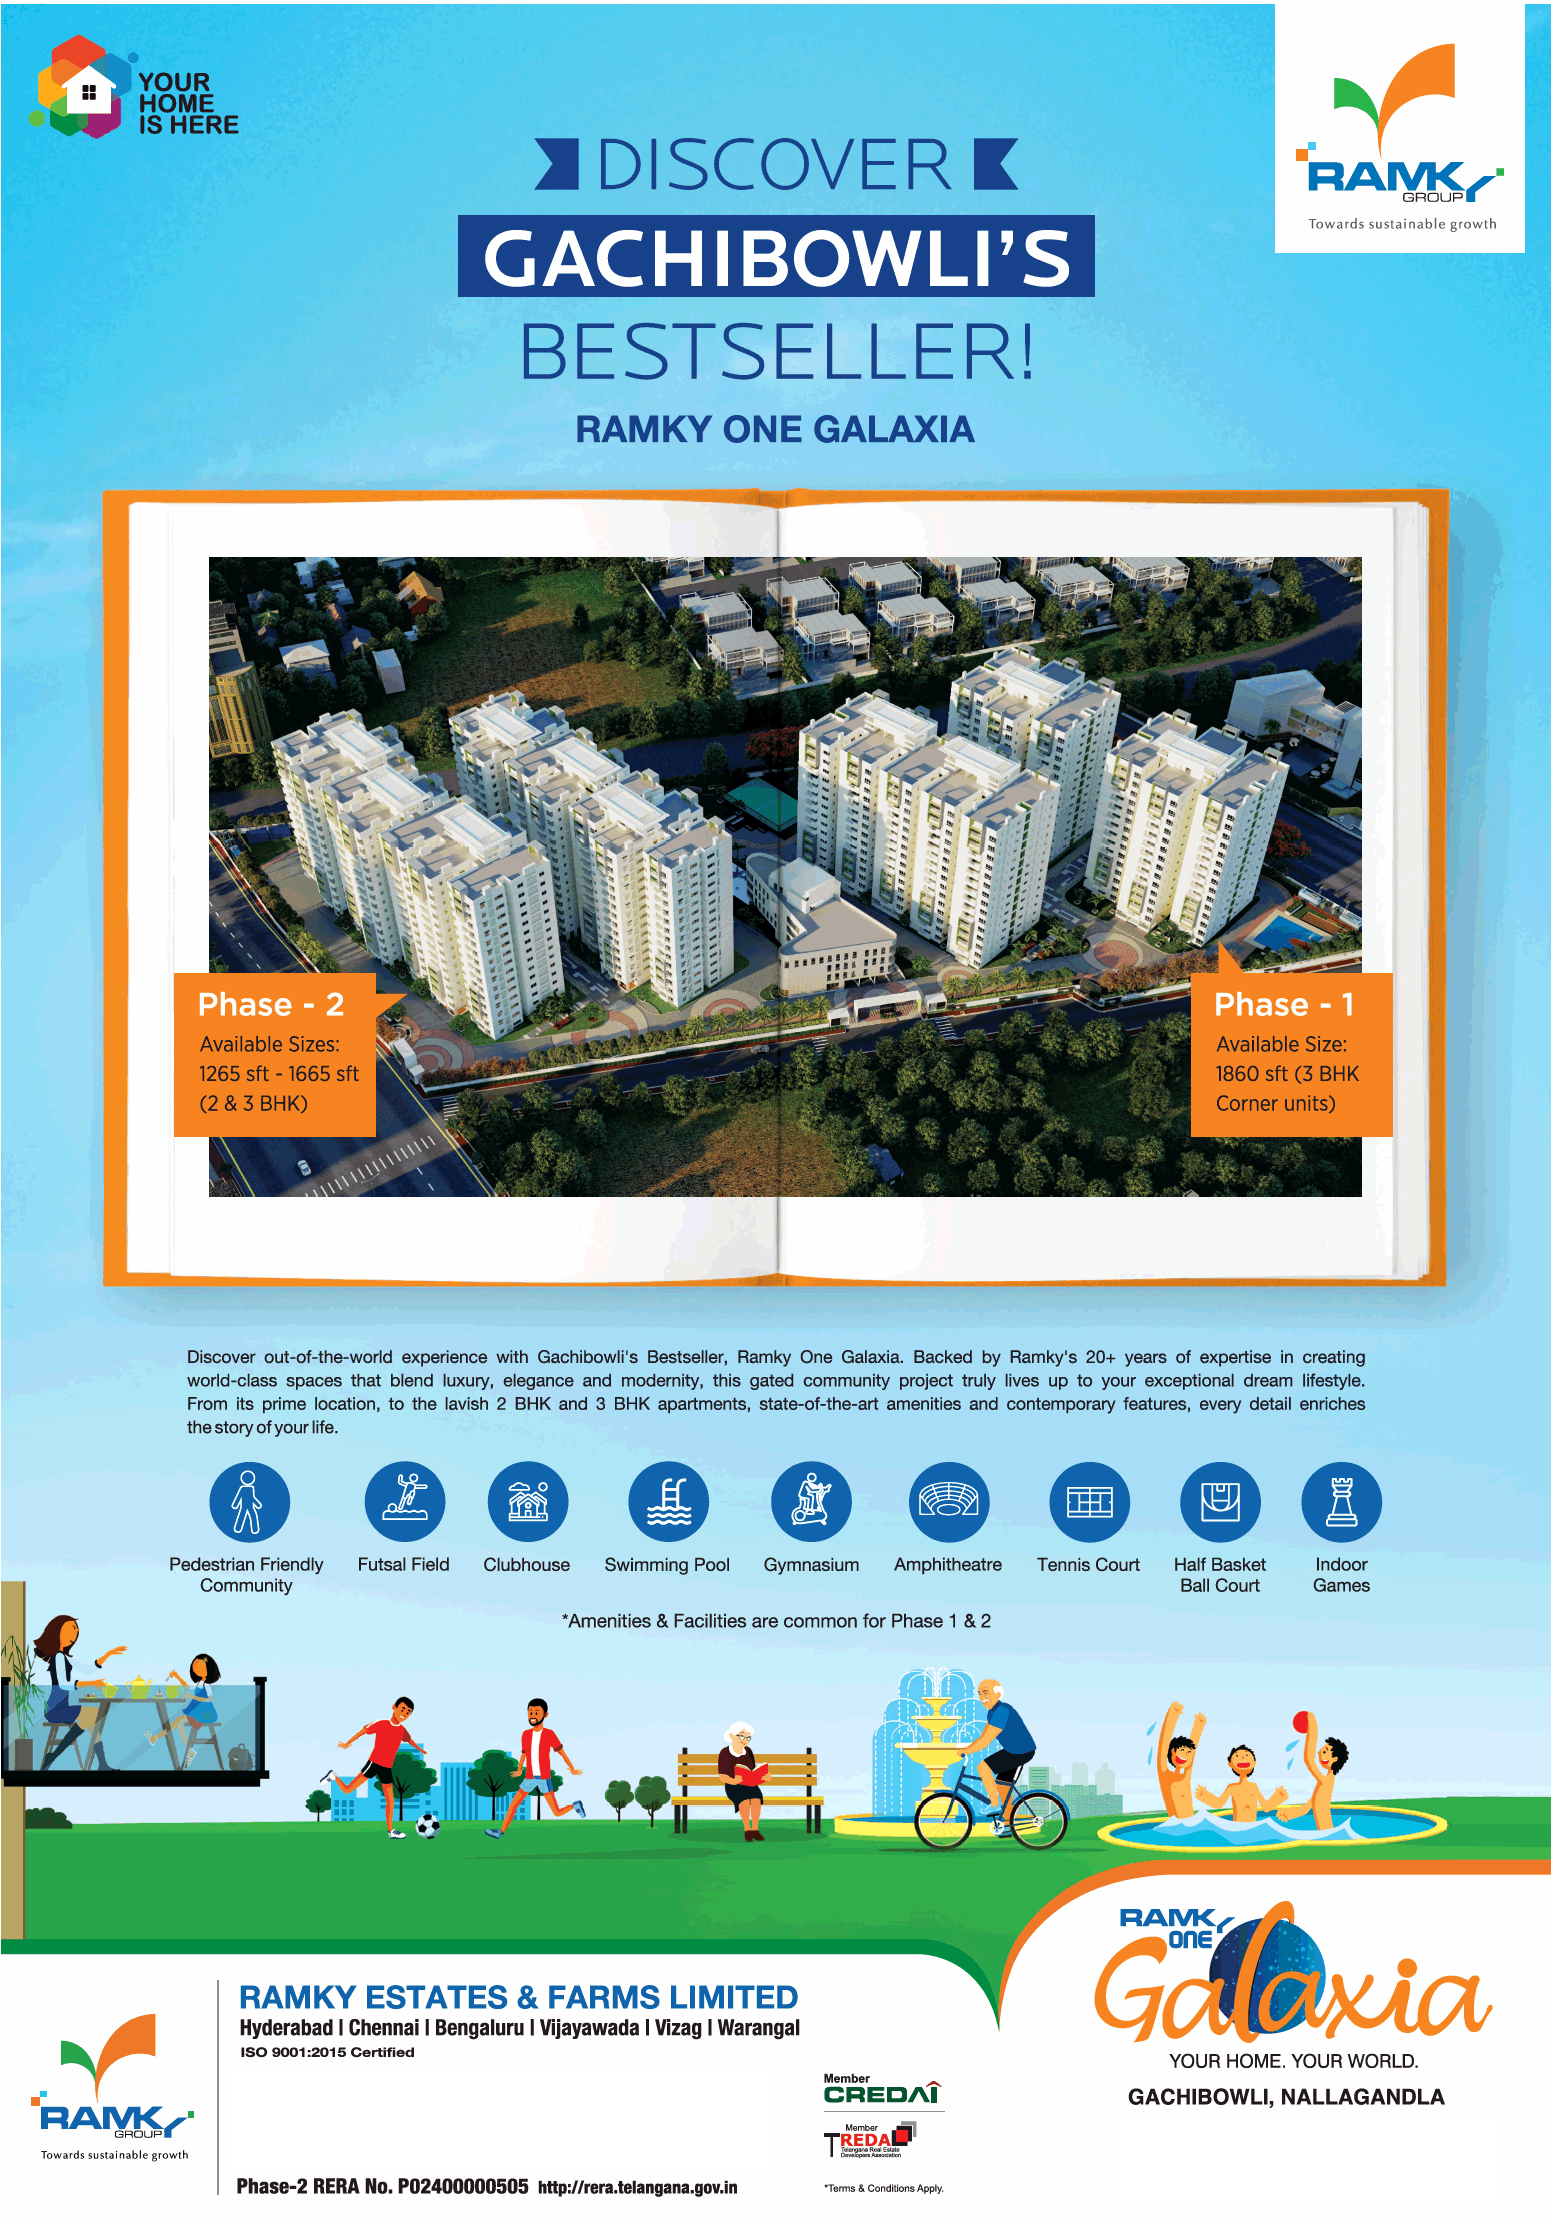 Ramky One Galaxia amenities & facilities are common for phase 1 & 2 in Hyderabad Update